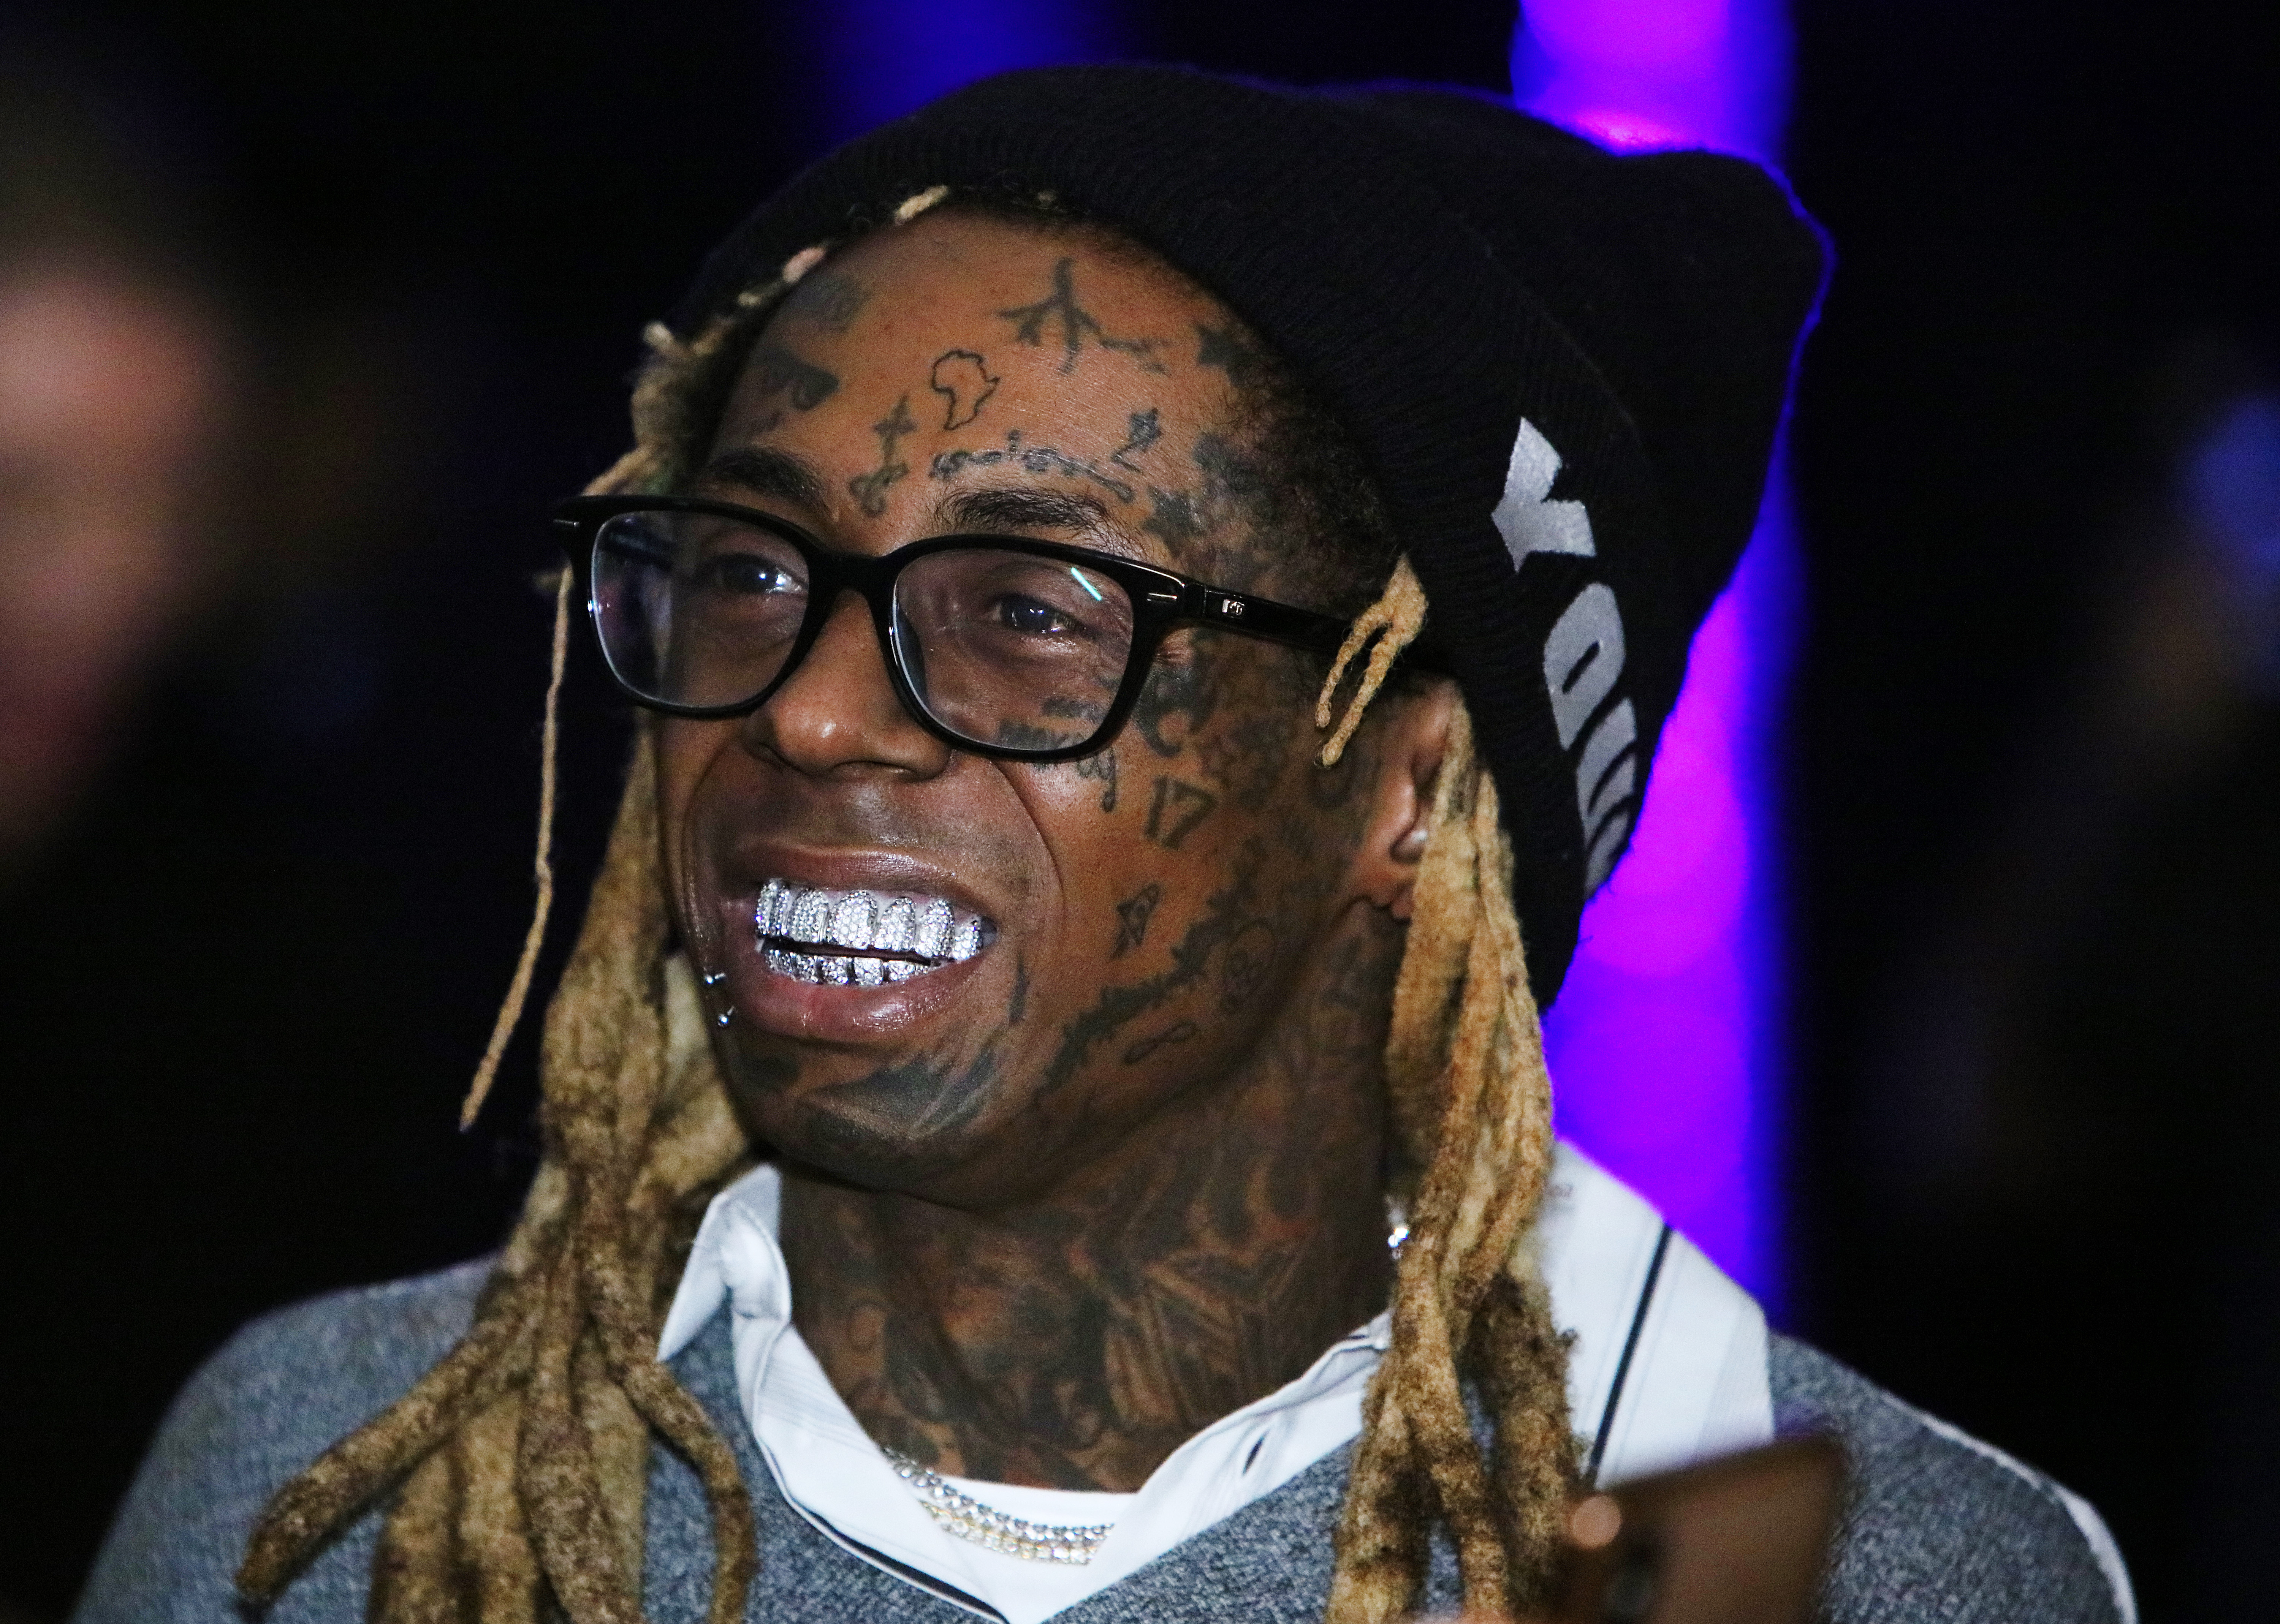 Lil Wayne Offered To Financially Help Ex-Cop Who Saved His Life